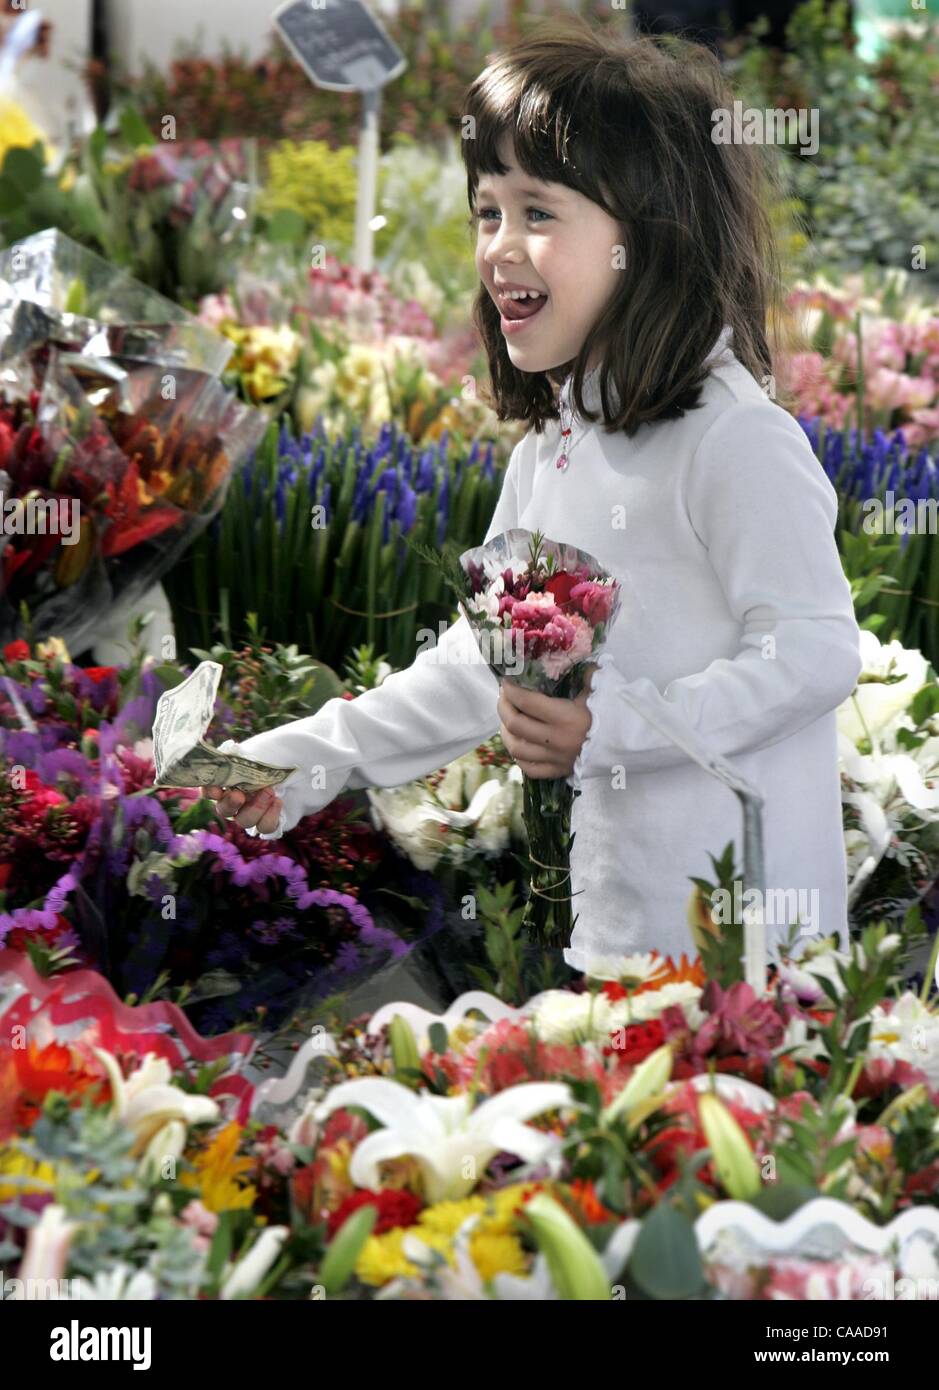 (Published 02/14/2005, B-3)SLflowers235221x001/Feb 13---Four-year-old Jenna Otaola (cq) from Tierrasanta ran to pay for her Valentine bouquet she purchased for her mother at Hidalgo Flowers booth at the Hillcrest Farmers Market.  Otaloa was shopping with her grandparents when she spotted the perfect Stock Photo